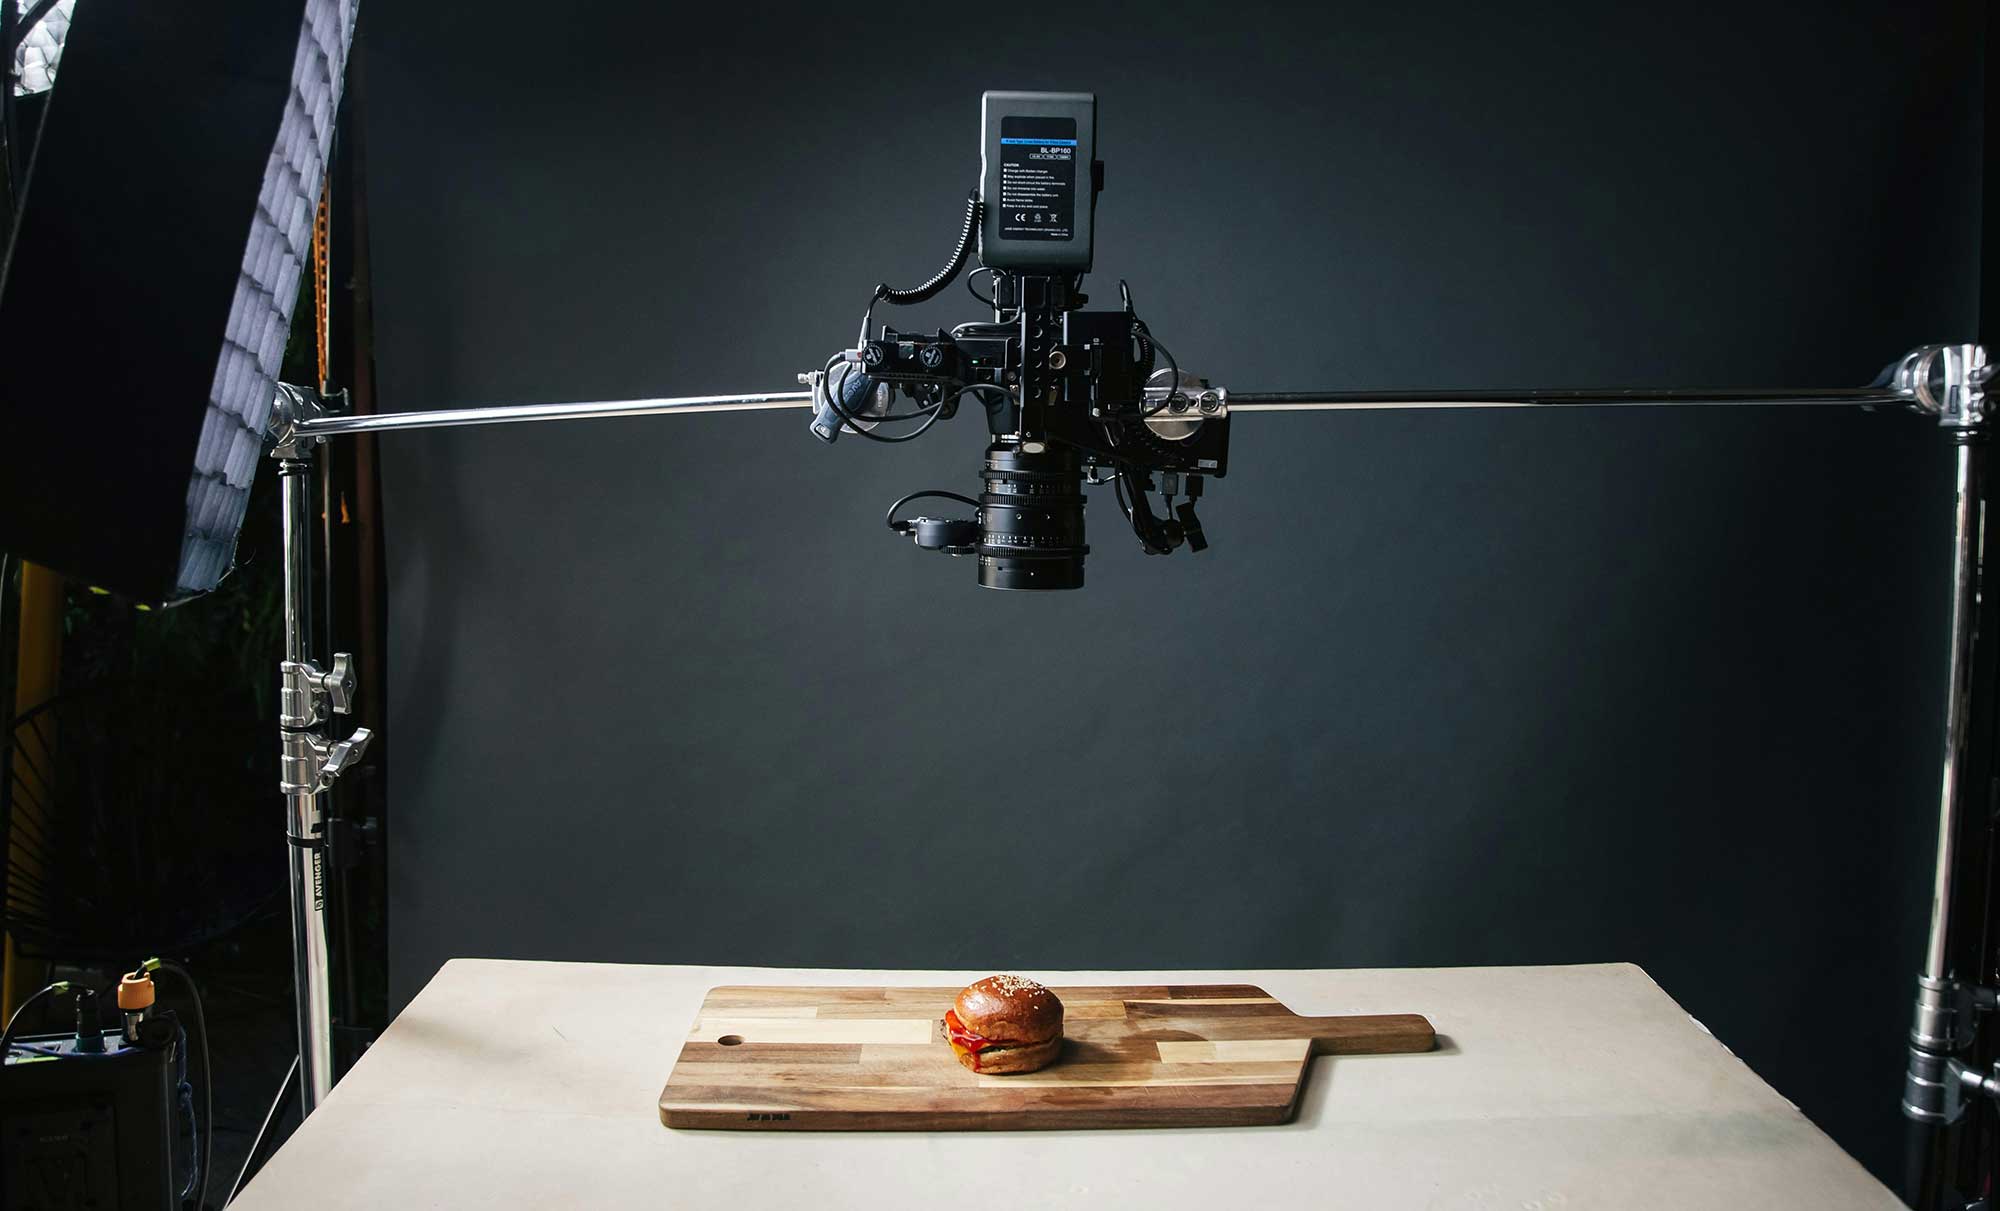 A camera being held in suspension films a burger on a cutting board from above.